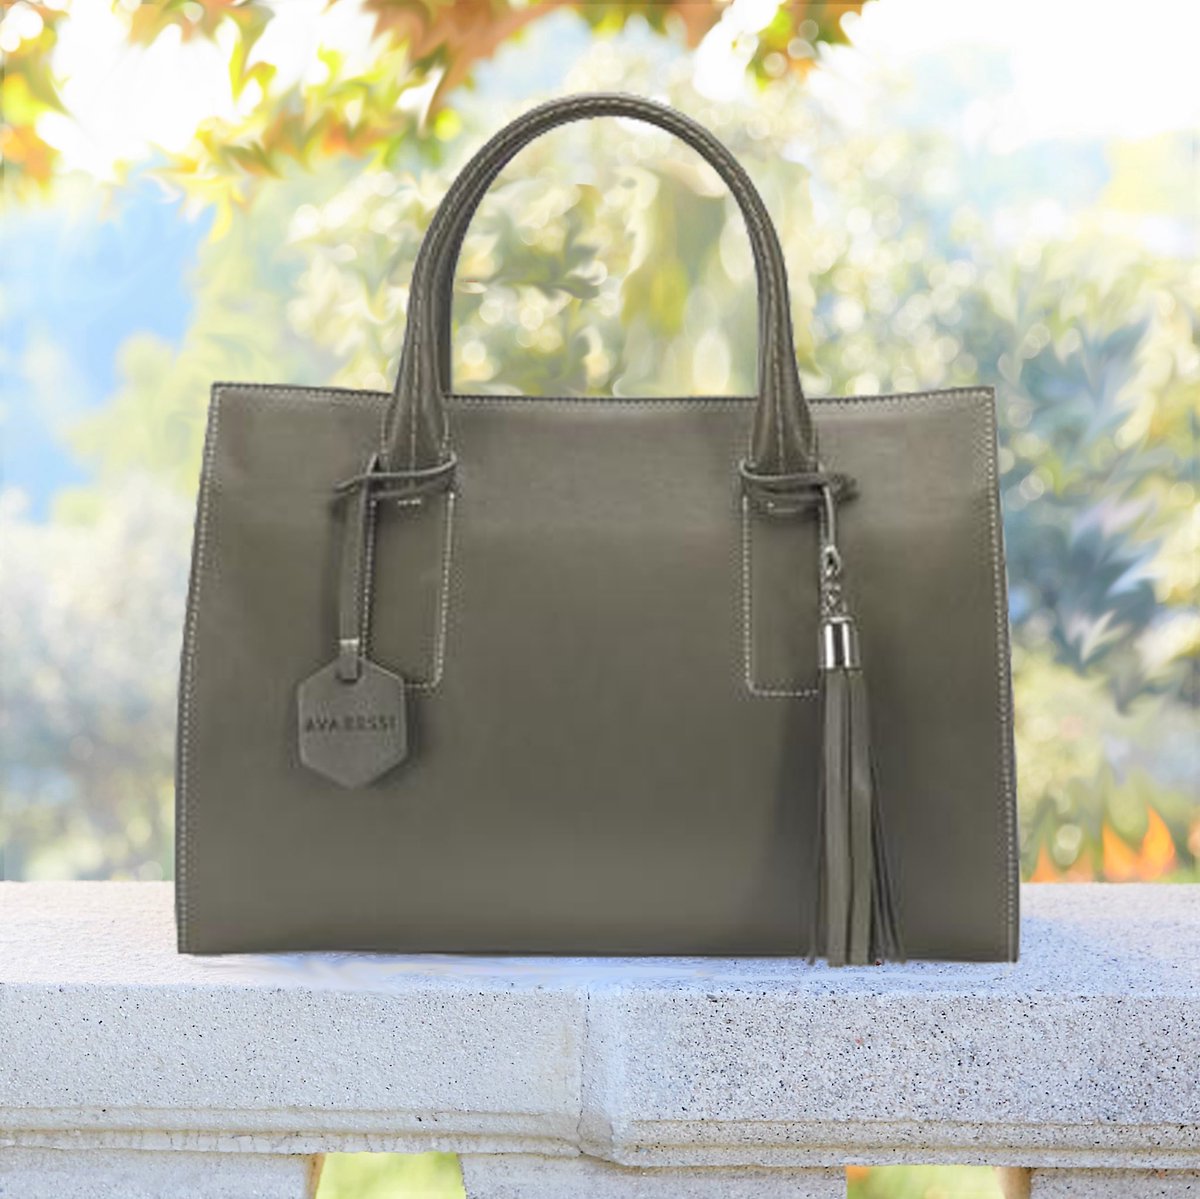 Wishing you sunshine and spring temps to brighten your Monday.  The Veneto.
#satchelbag #musthave #italianleather #monday #artisanmade #carryallbag #weloveleather #spring #fashion #classicstyle #checkusout #loveit #tagafriend #sharethelove #shopfromhome #onlineshop #avarossibags